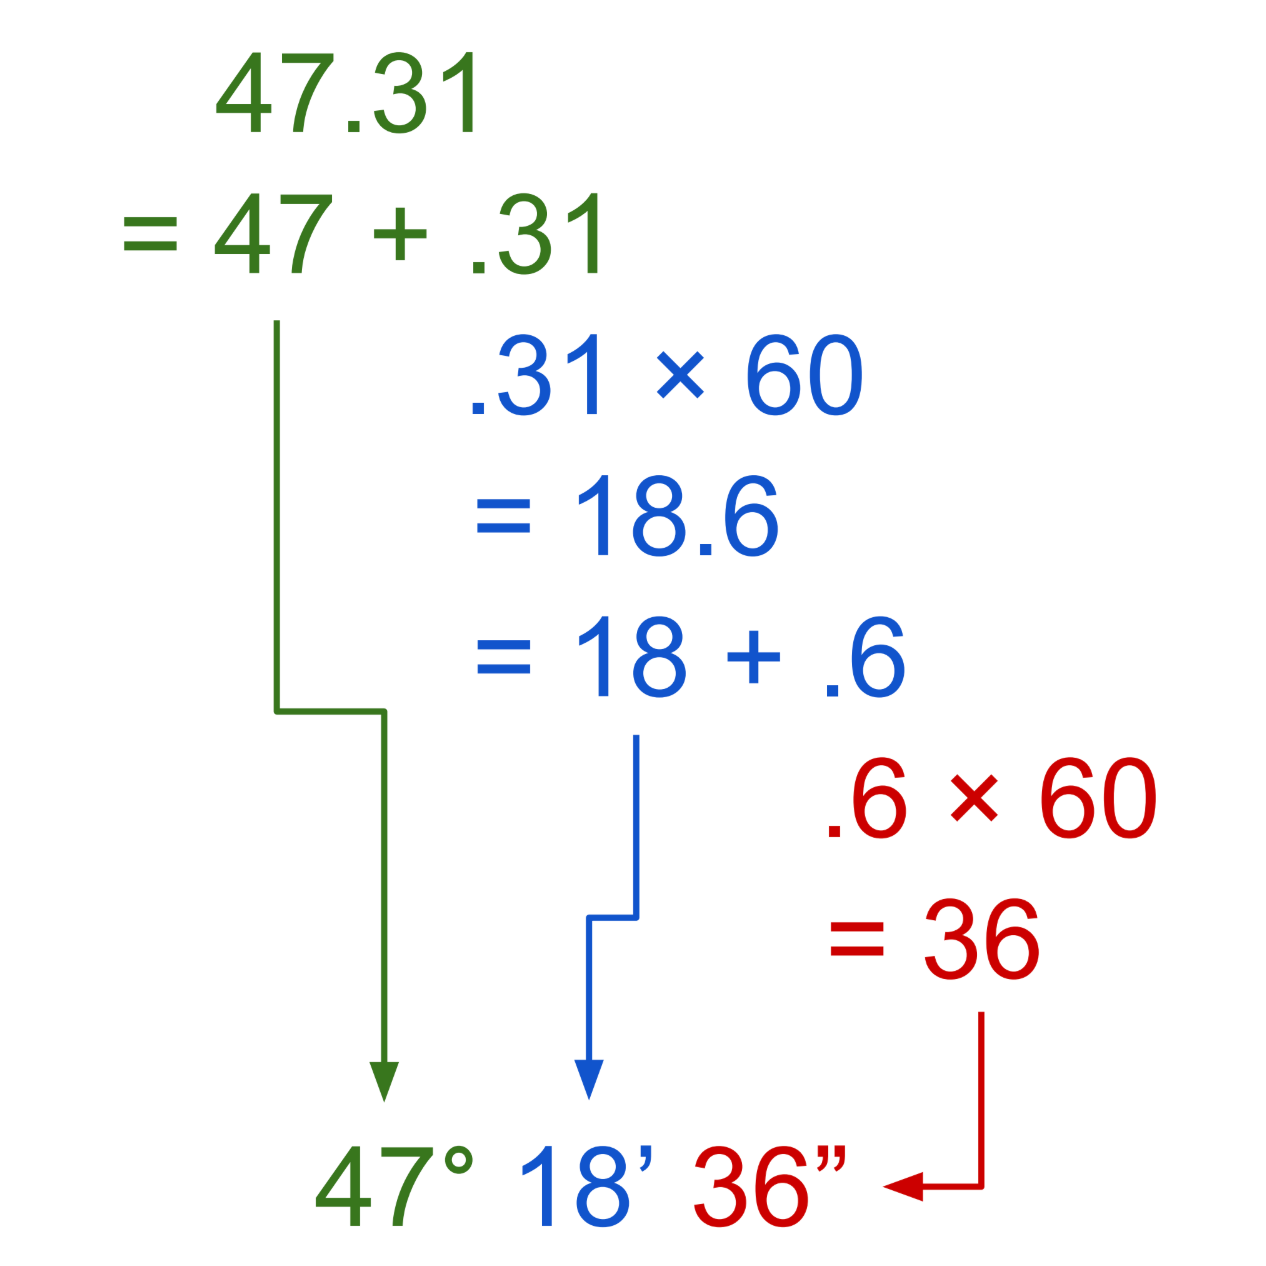 graphic showing how to apply the equations to convert degrees in decimal to minutes & seconds